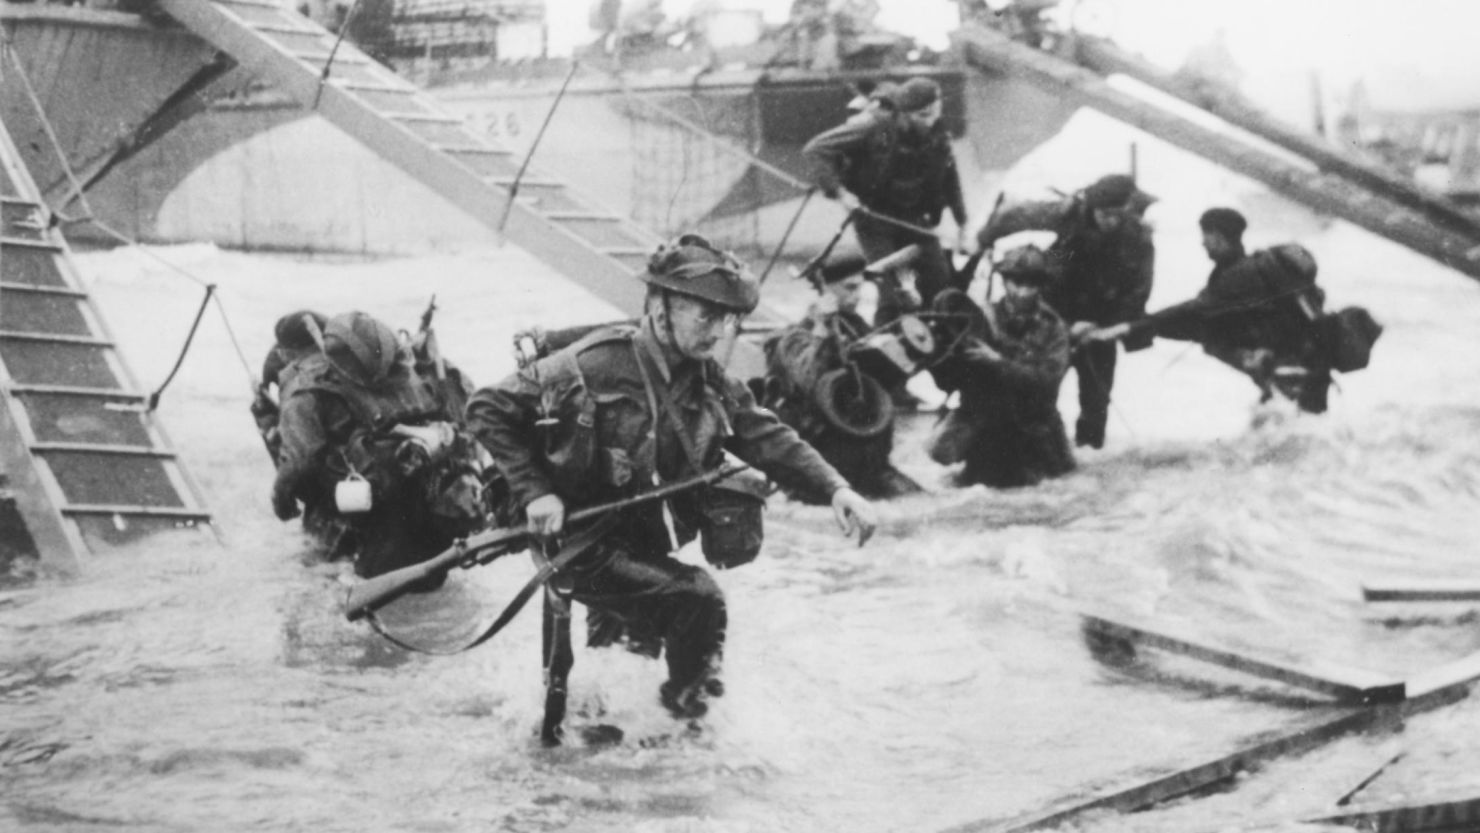 Troops from the 48th Royal Marines disembark on Juno Beach during the D-Day landings on June 6, 1944.